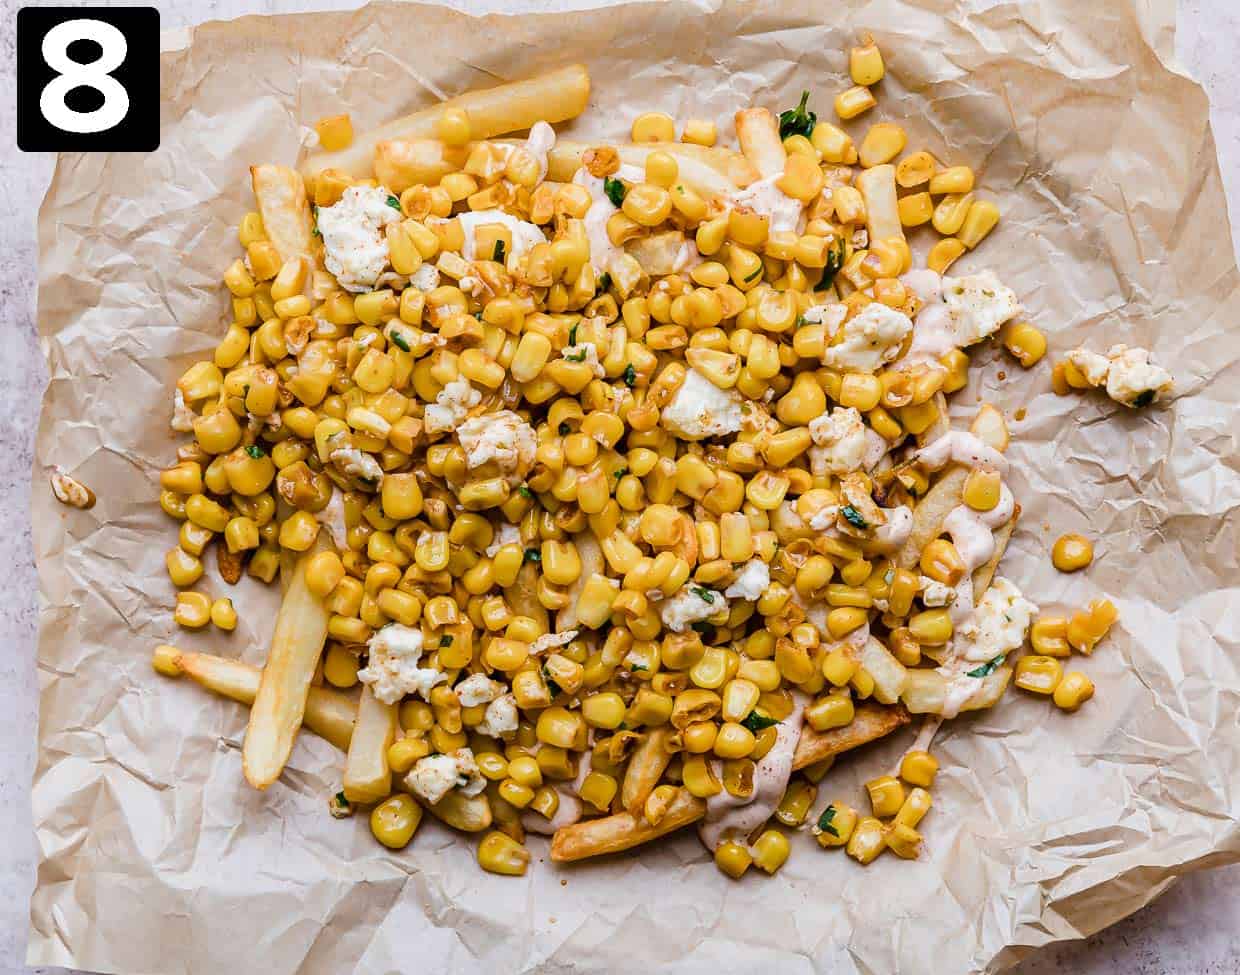 Fries topped with a Mexican Street Corn mixture on a parchment paper.